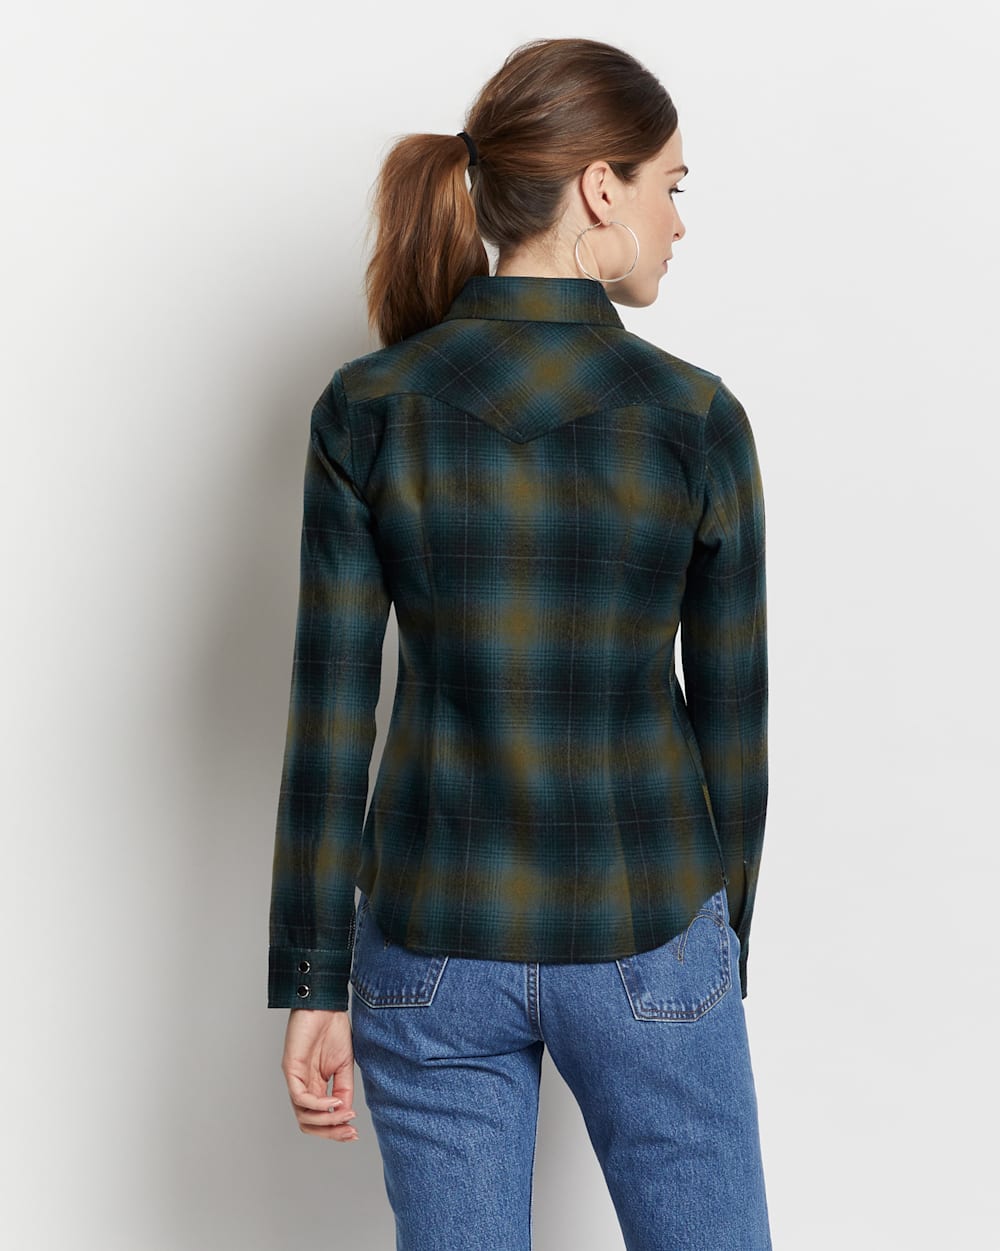 ALTERNATE VIEW OF WOMEN'S SNAP-FRONT CANYON SHIRT IN GREEN OMBRE image number 5